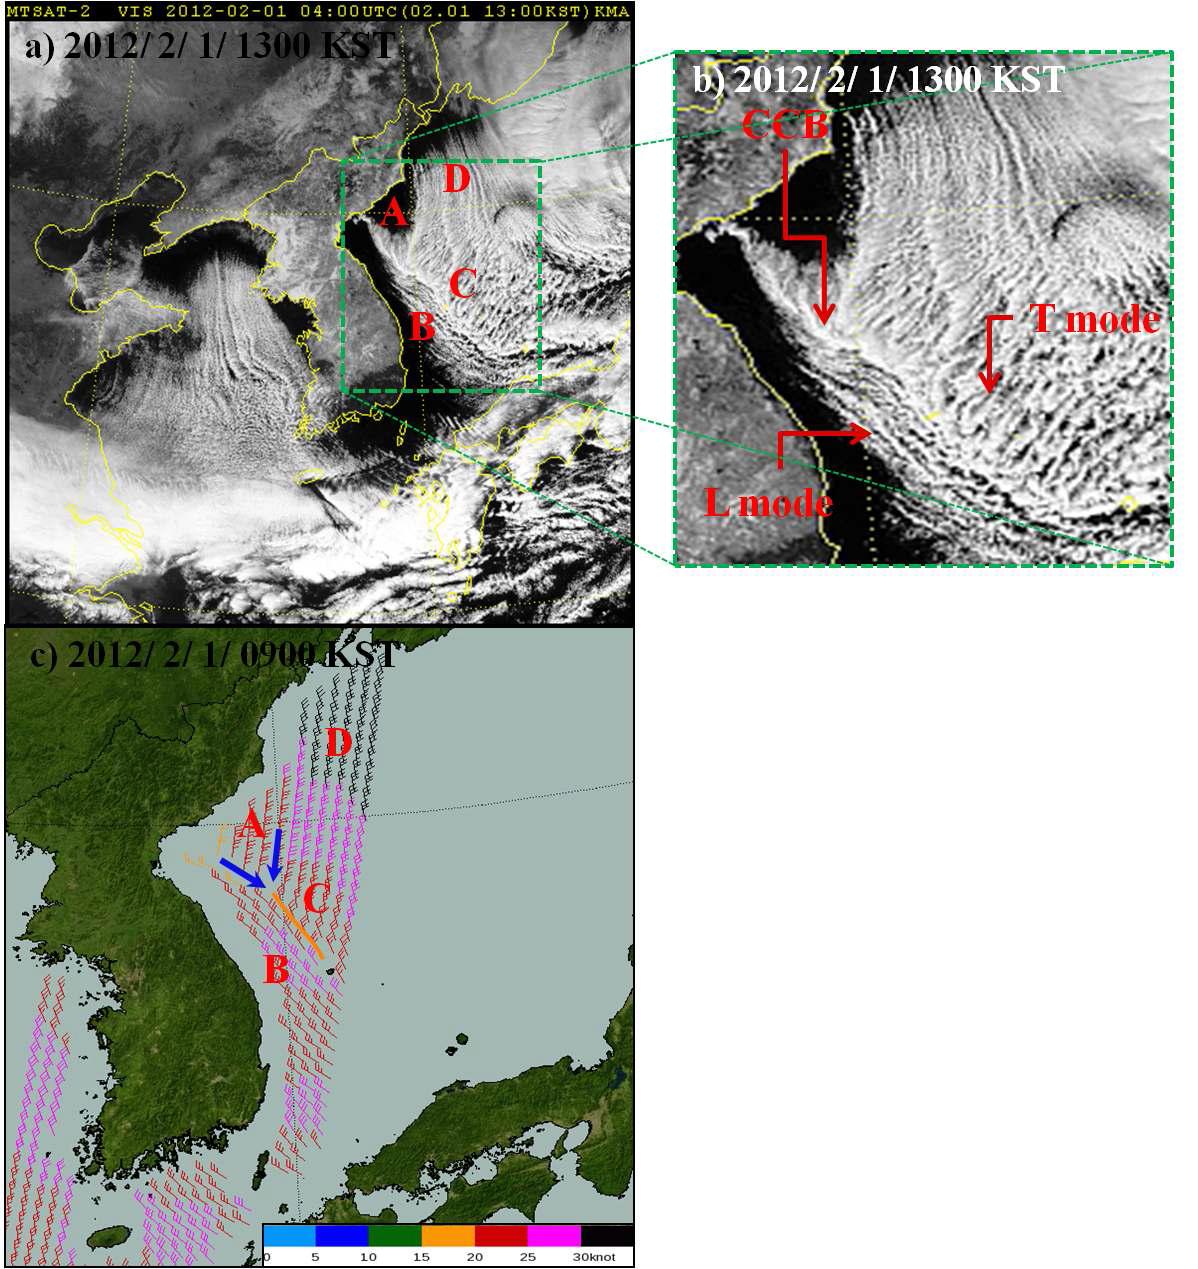 (a, b) The MTSAT-2 satellite visible image and (c) The ASCAT/Ocean wind satellite composited image and solid orange line indicates convergence zone.